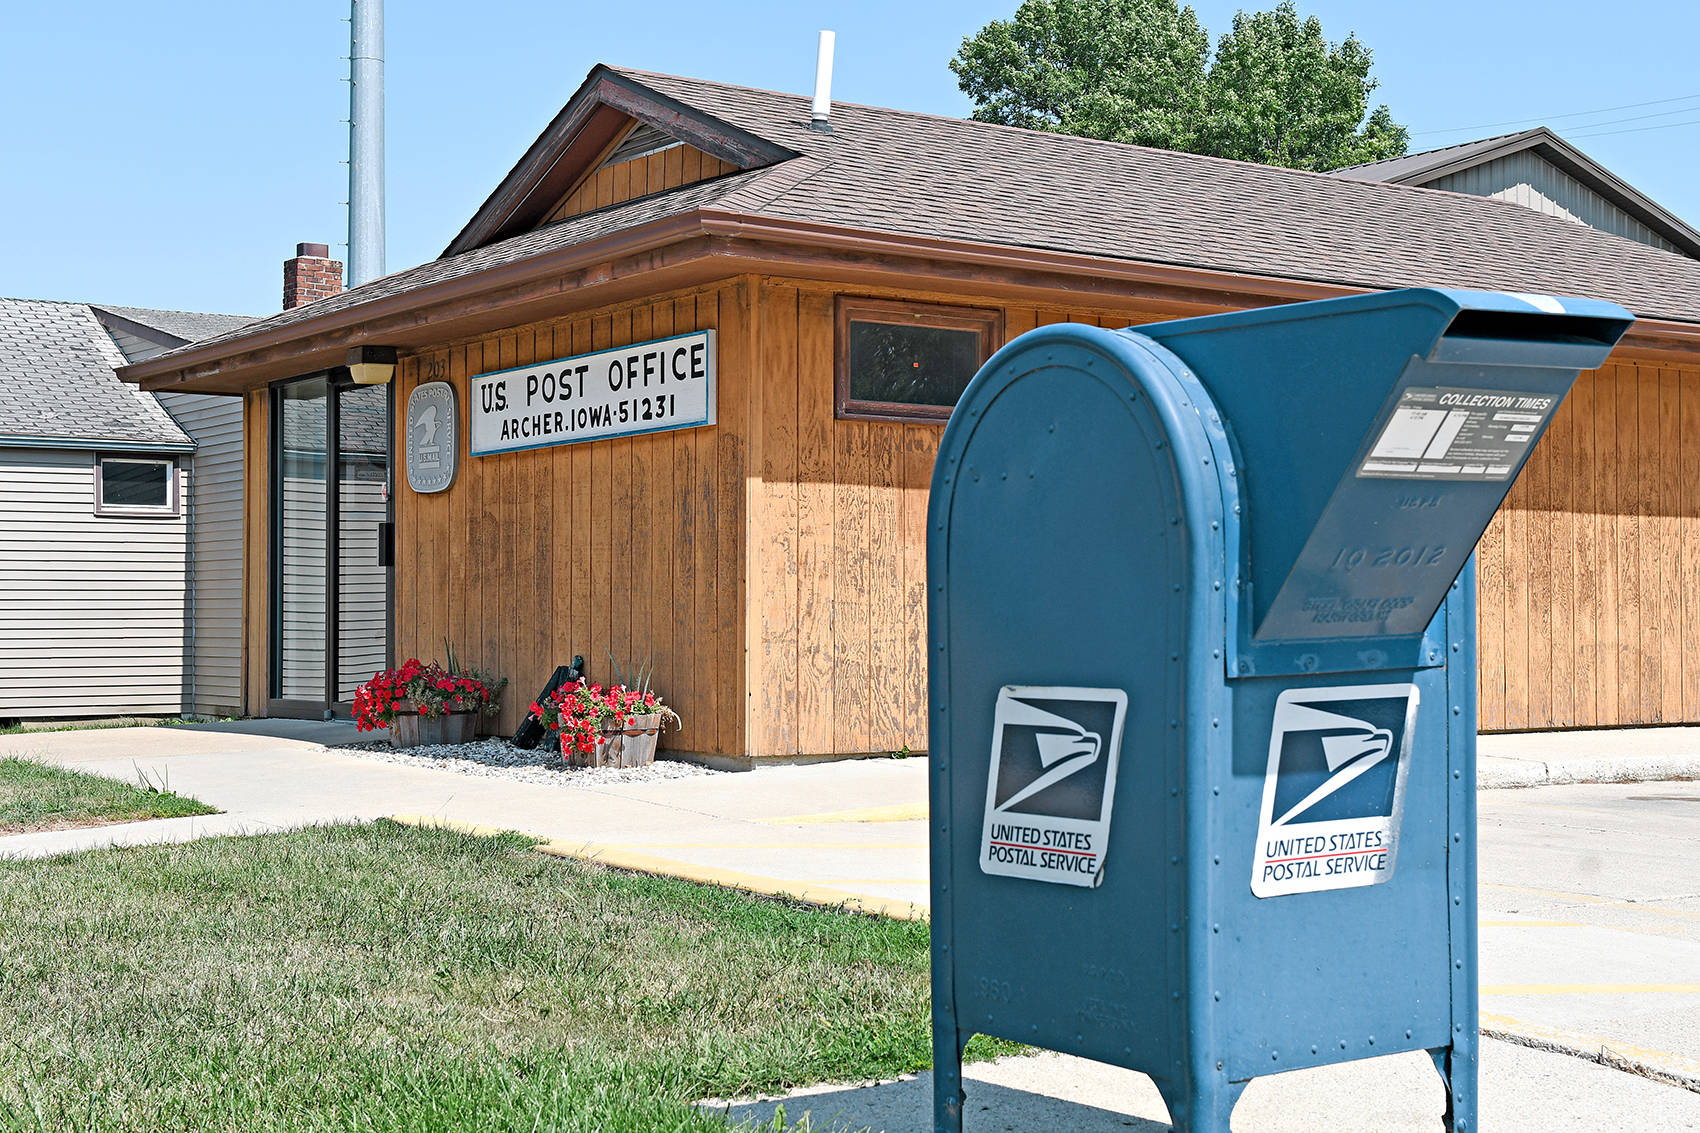 U.S Post Office At Archer Town Wallpaper